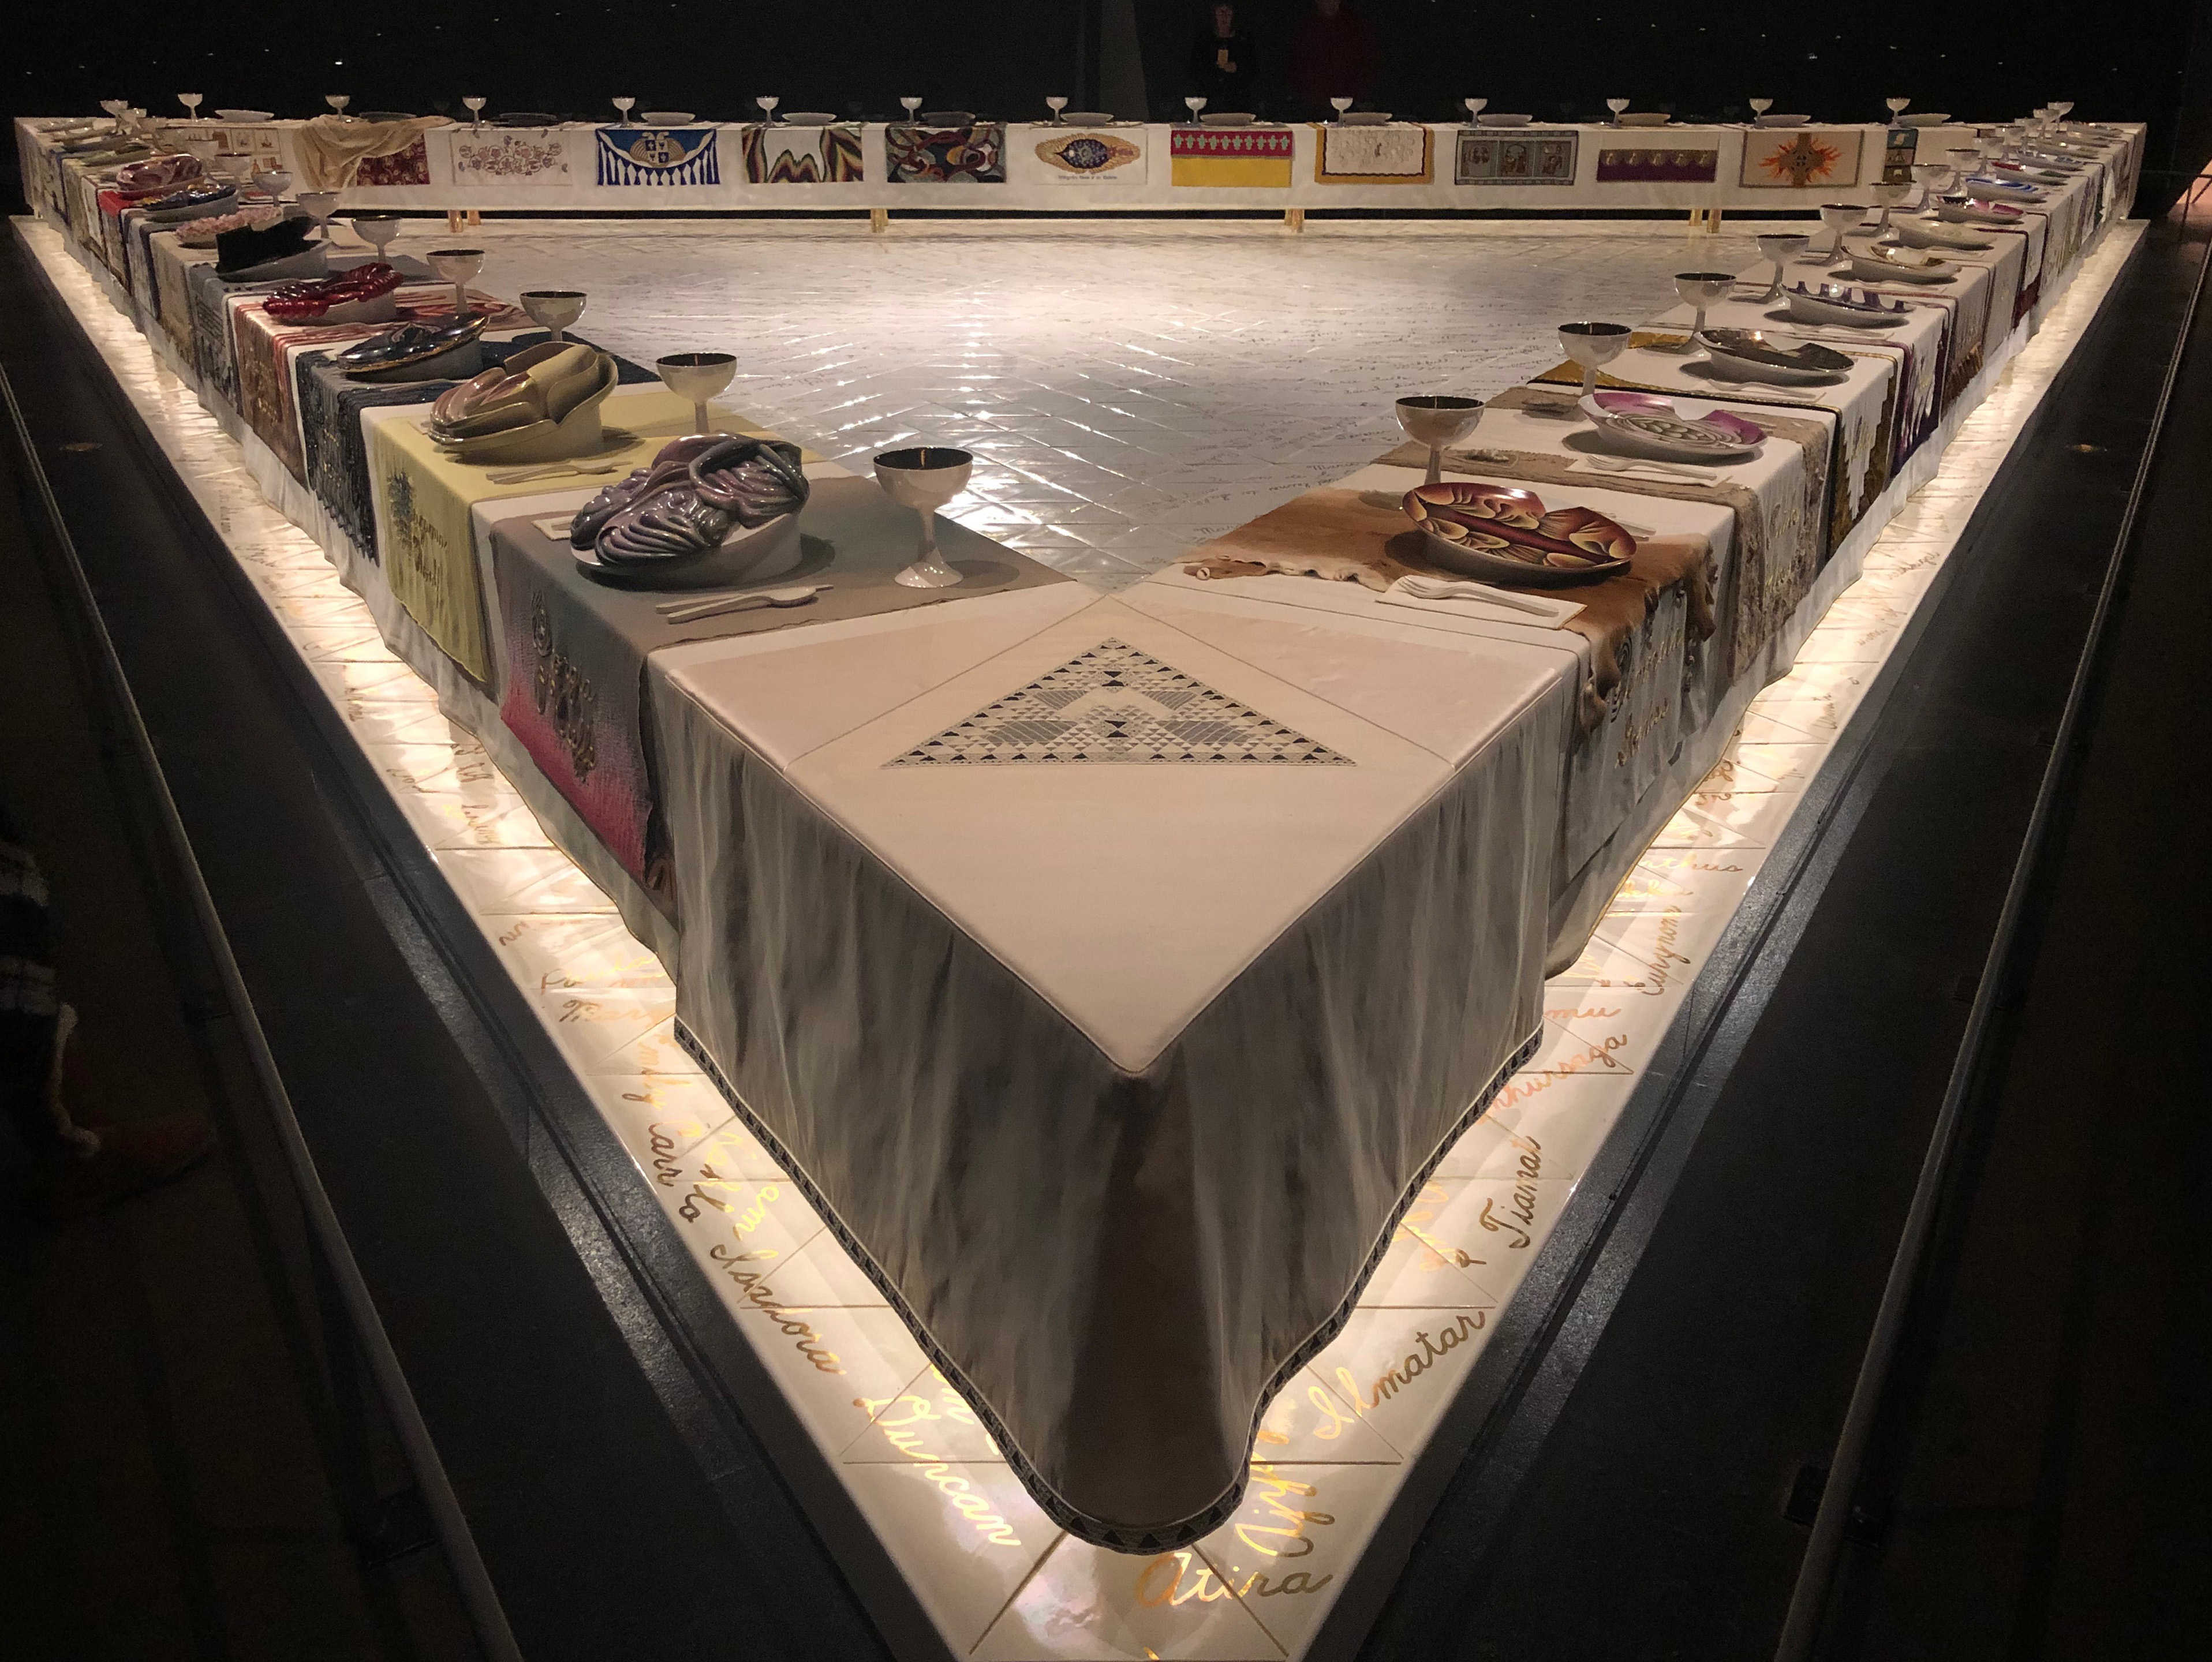 PHOTO: Each side or "wing" of "The Dinner Party" represents different sections of history. Wing One has women from prehistory to classical Rome, Wing Two women from Christianity to The Reformation and Wing Three from The American Revolution to the Women's Revolution. PHOTO: Photo of Georgia O'Keeffe's place at Judy Chicago's "The Dinner Party" installation at the Brooklyn Museum. O'Keeffe was one of a handful of women with place settings that was living at the time of its creation. Place setting features a large mauve plate with a vaginal opening. Photo by of The Signal Advisor Lindsay Humphrey.